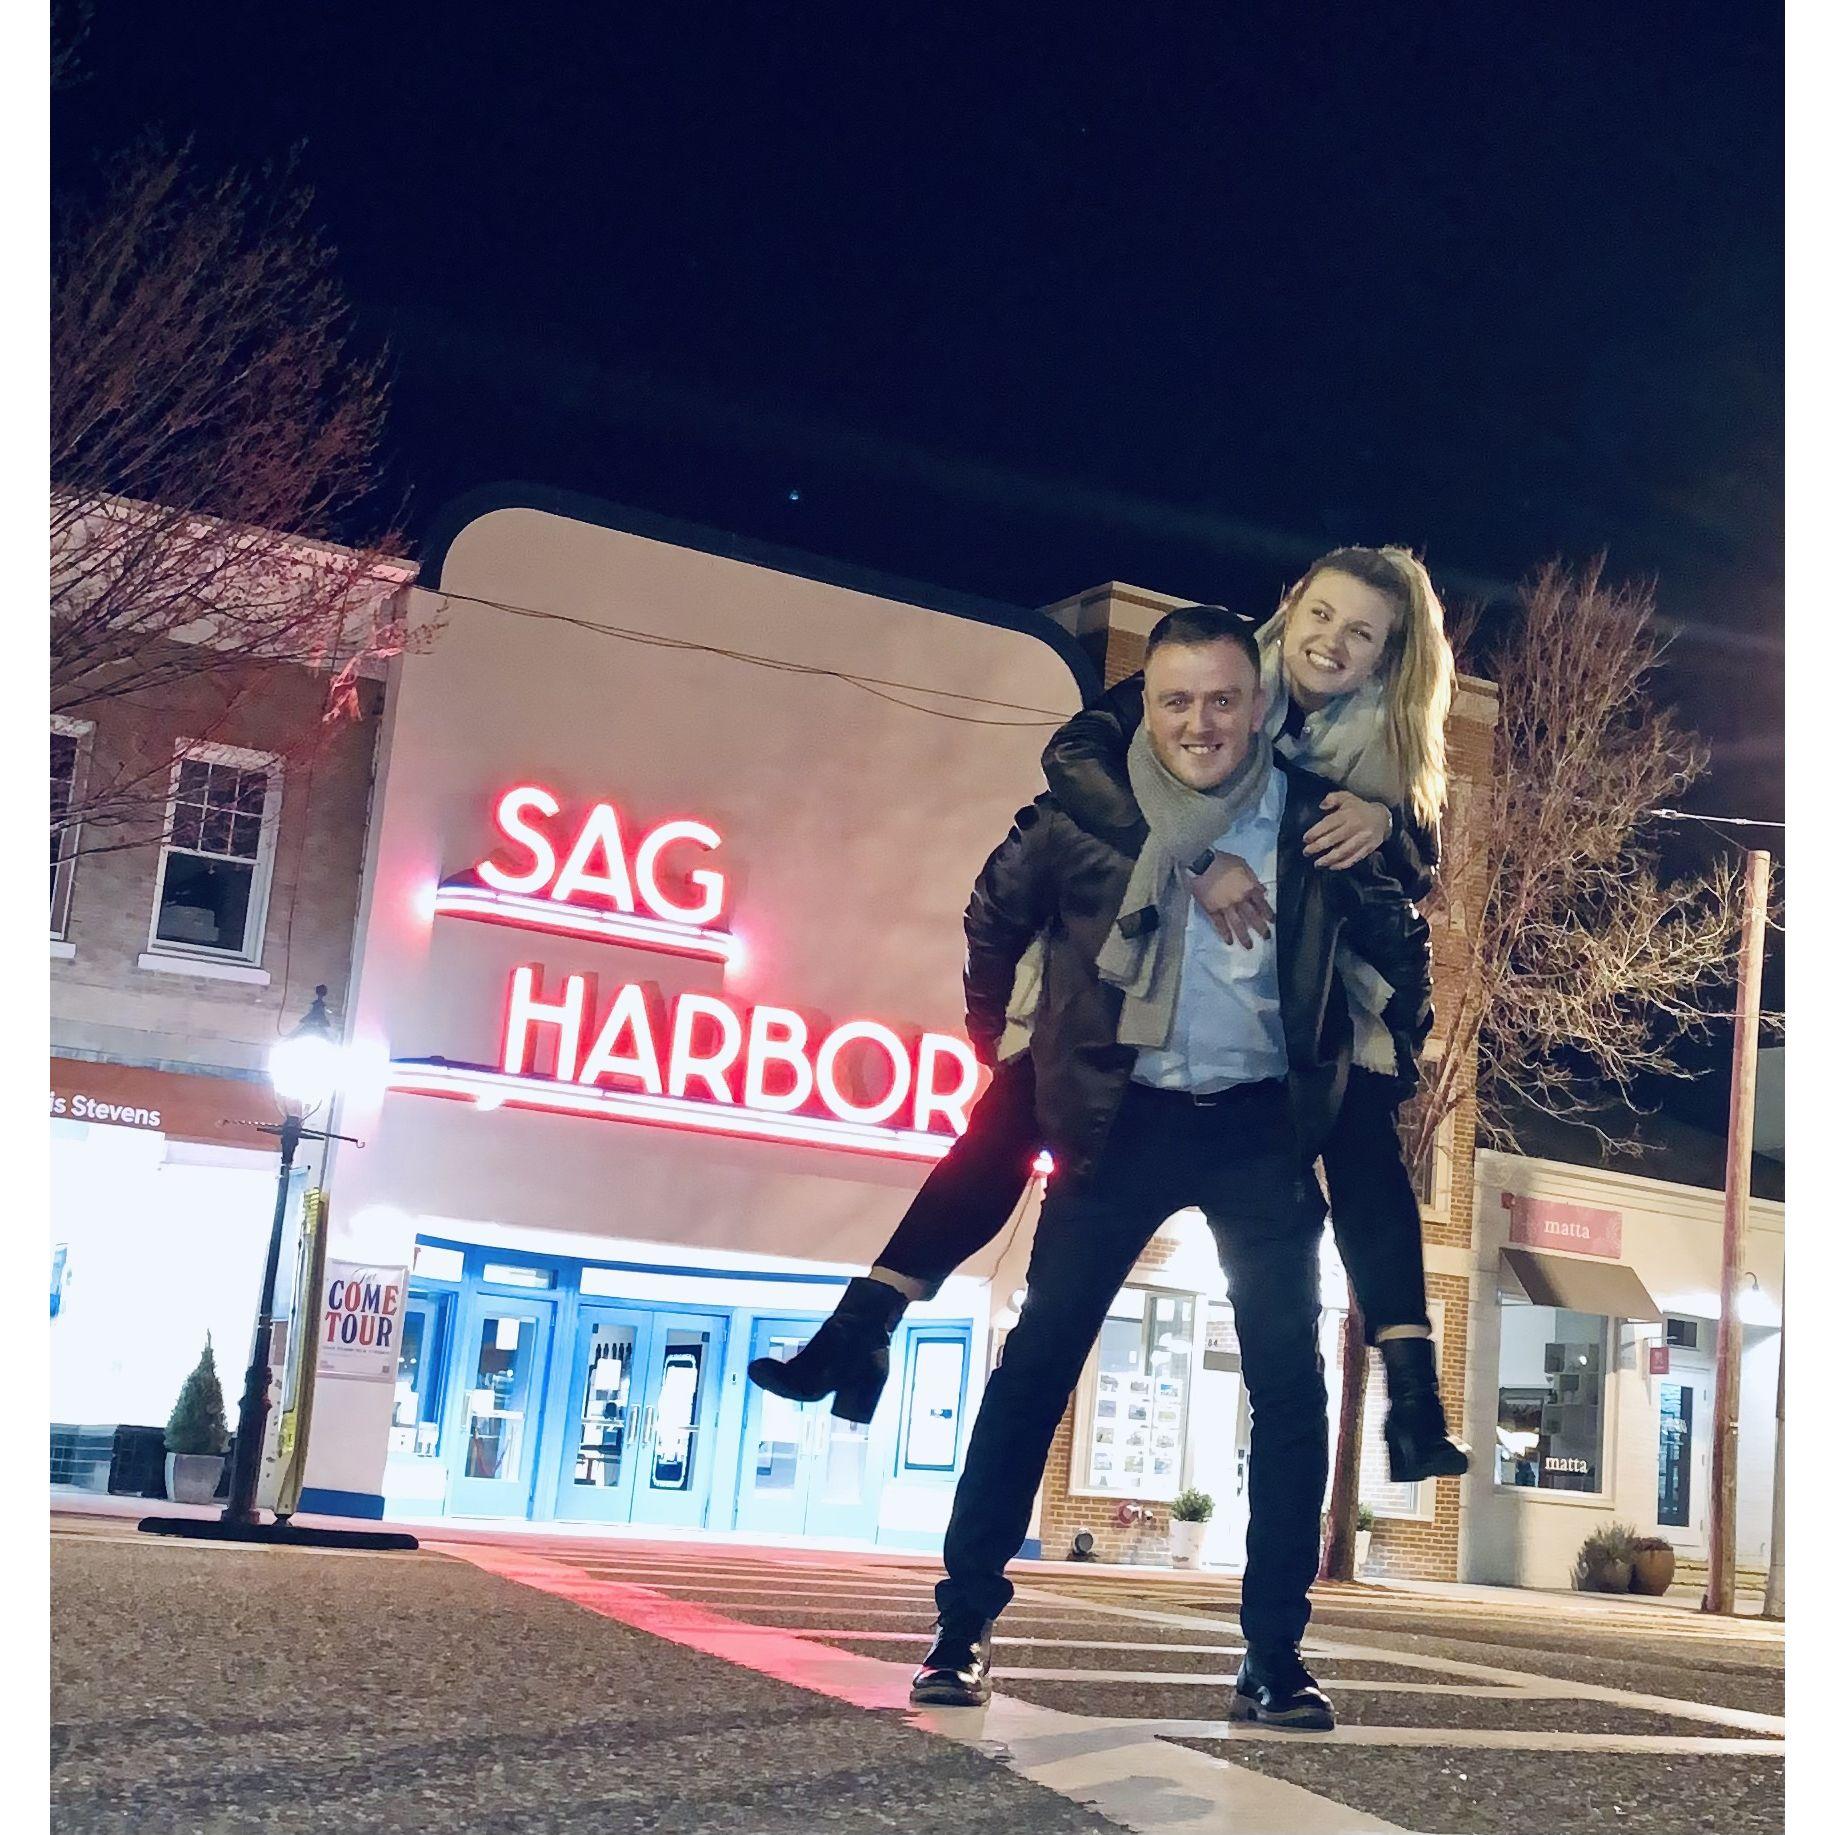 Our favorite place - Sag Harbor,  where we met!